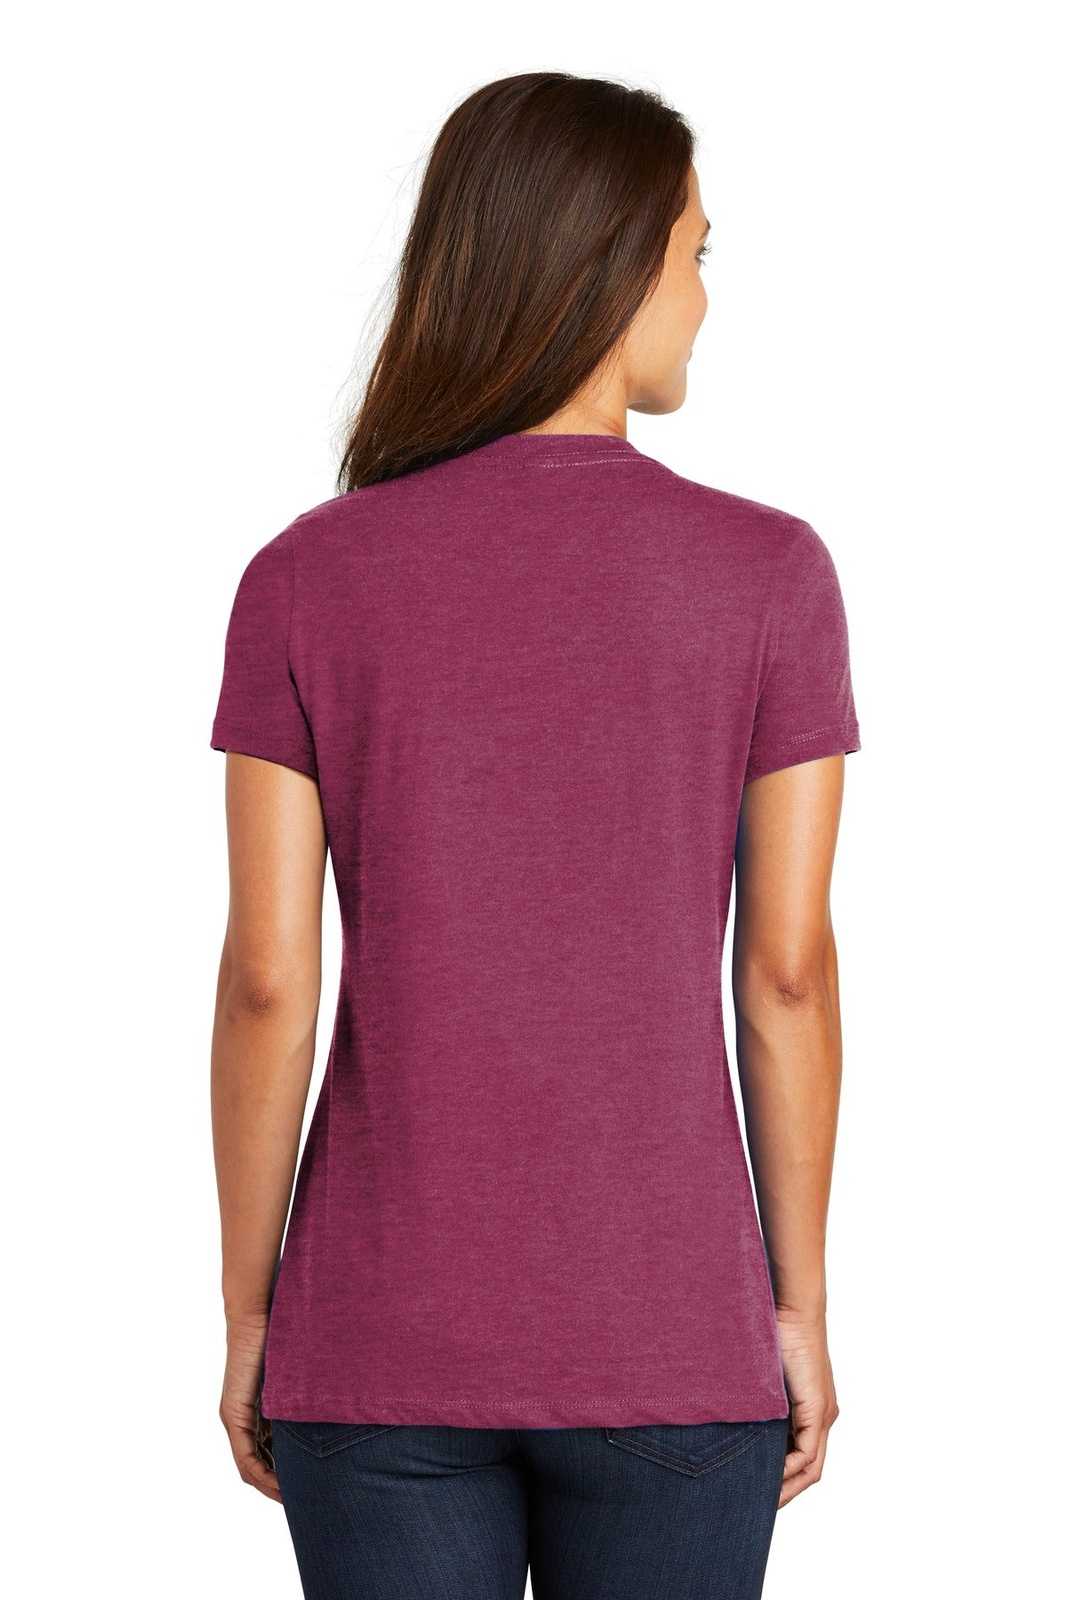 District DM1170L Women's Perfect Weight V-Neck Tee - Heathered Loganberry - HIT a Double - 1